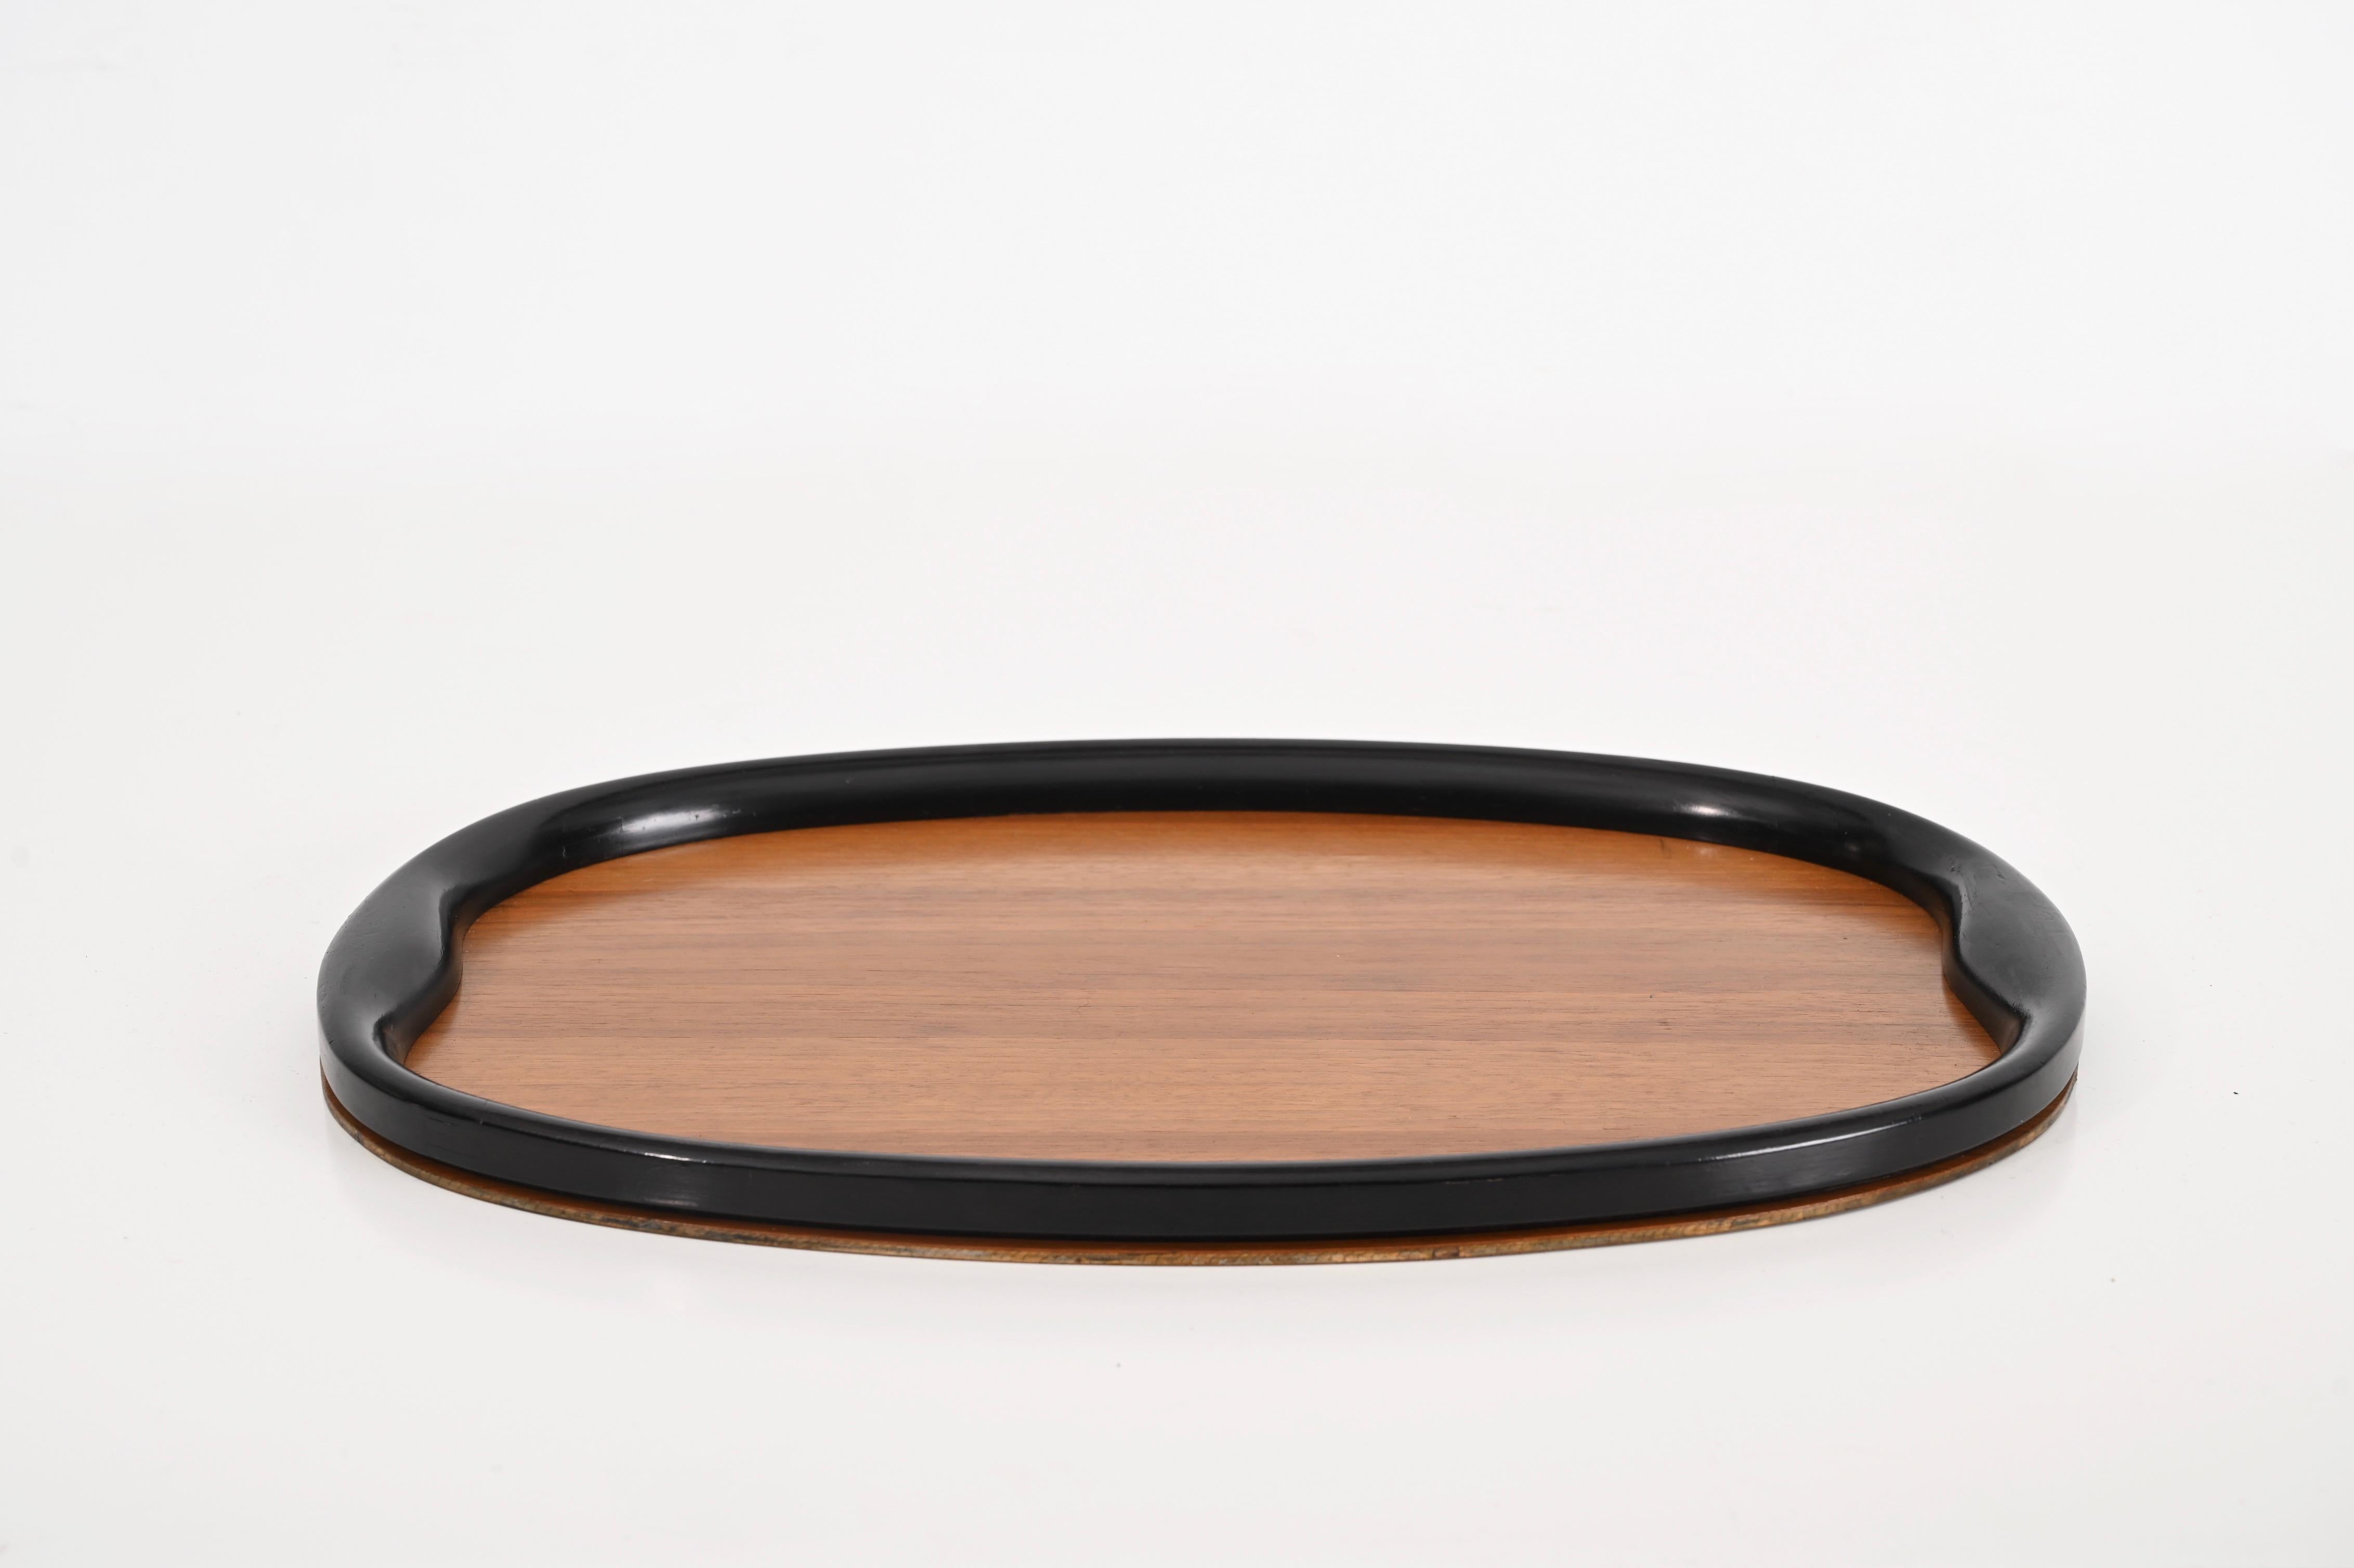 Pair of Art Deco Serving Trays, Ebonized Wood and Walnut, Italy, 1940s For Sale 3